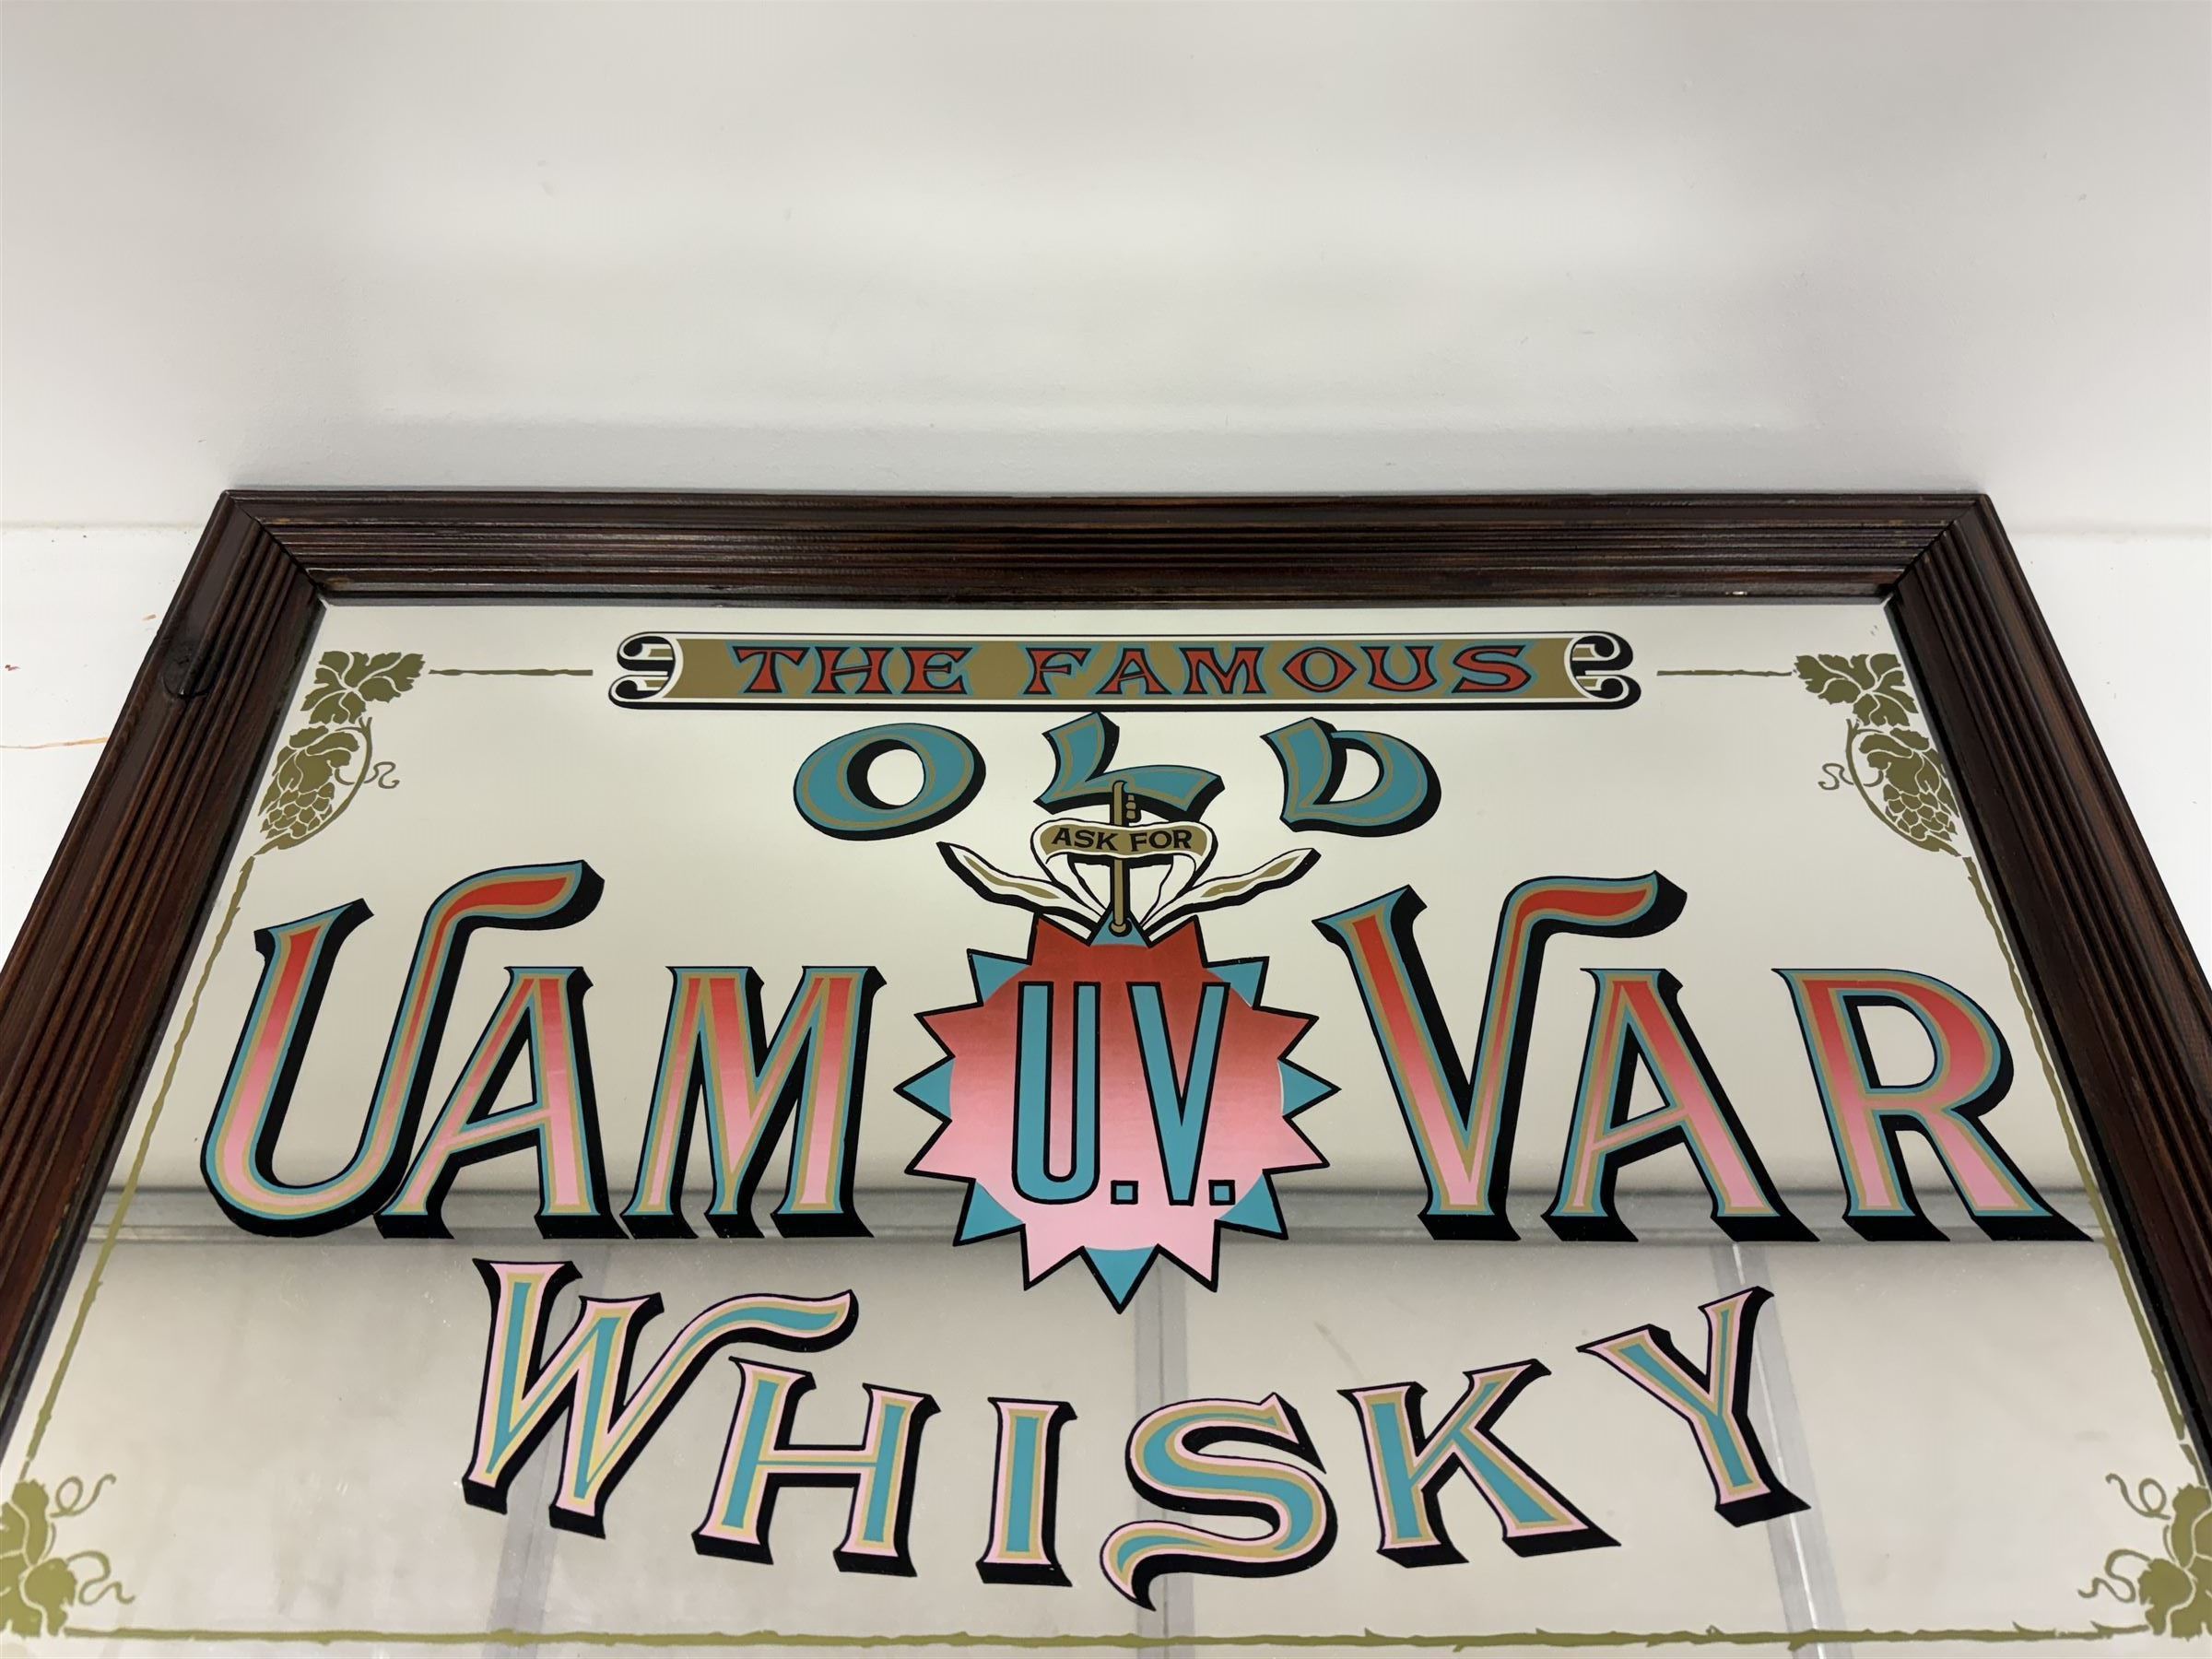 The Famous Old Uam Var Whisky advertising mirror - Image 3 of 3